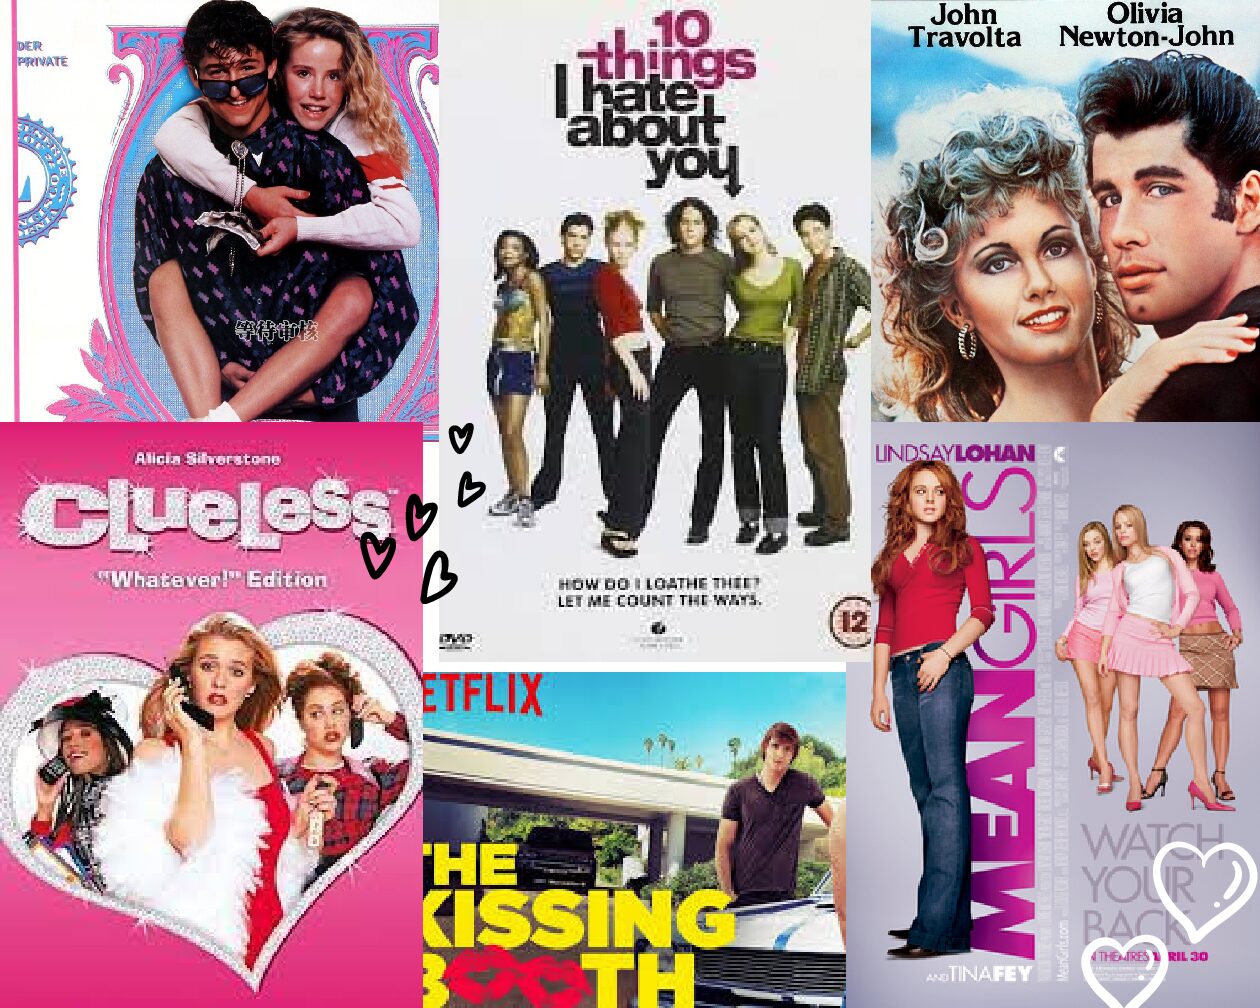 How to Pick a Good Rom-Com Based on Its Poster